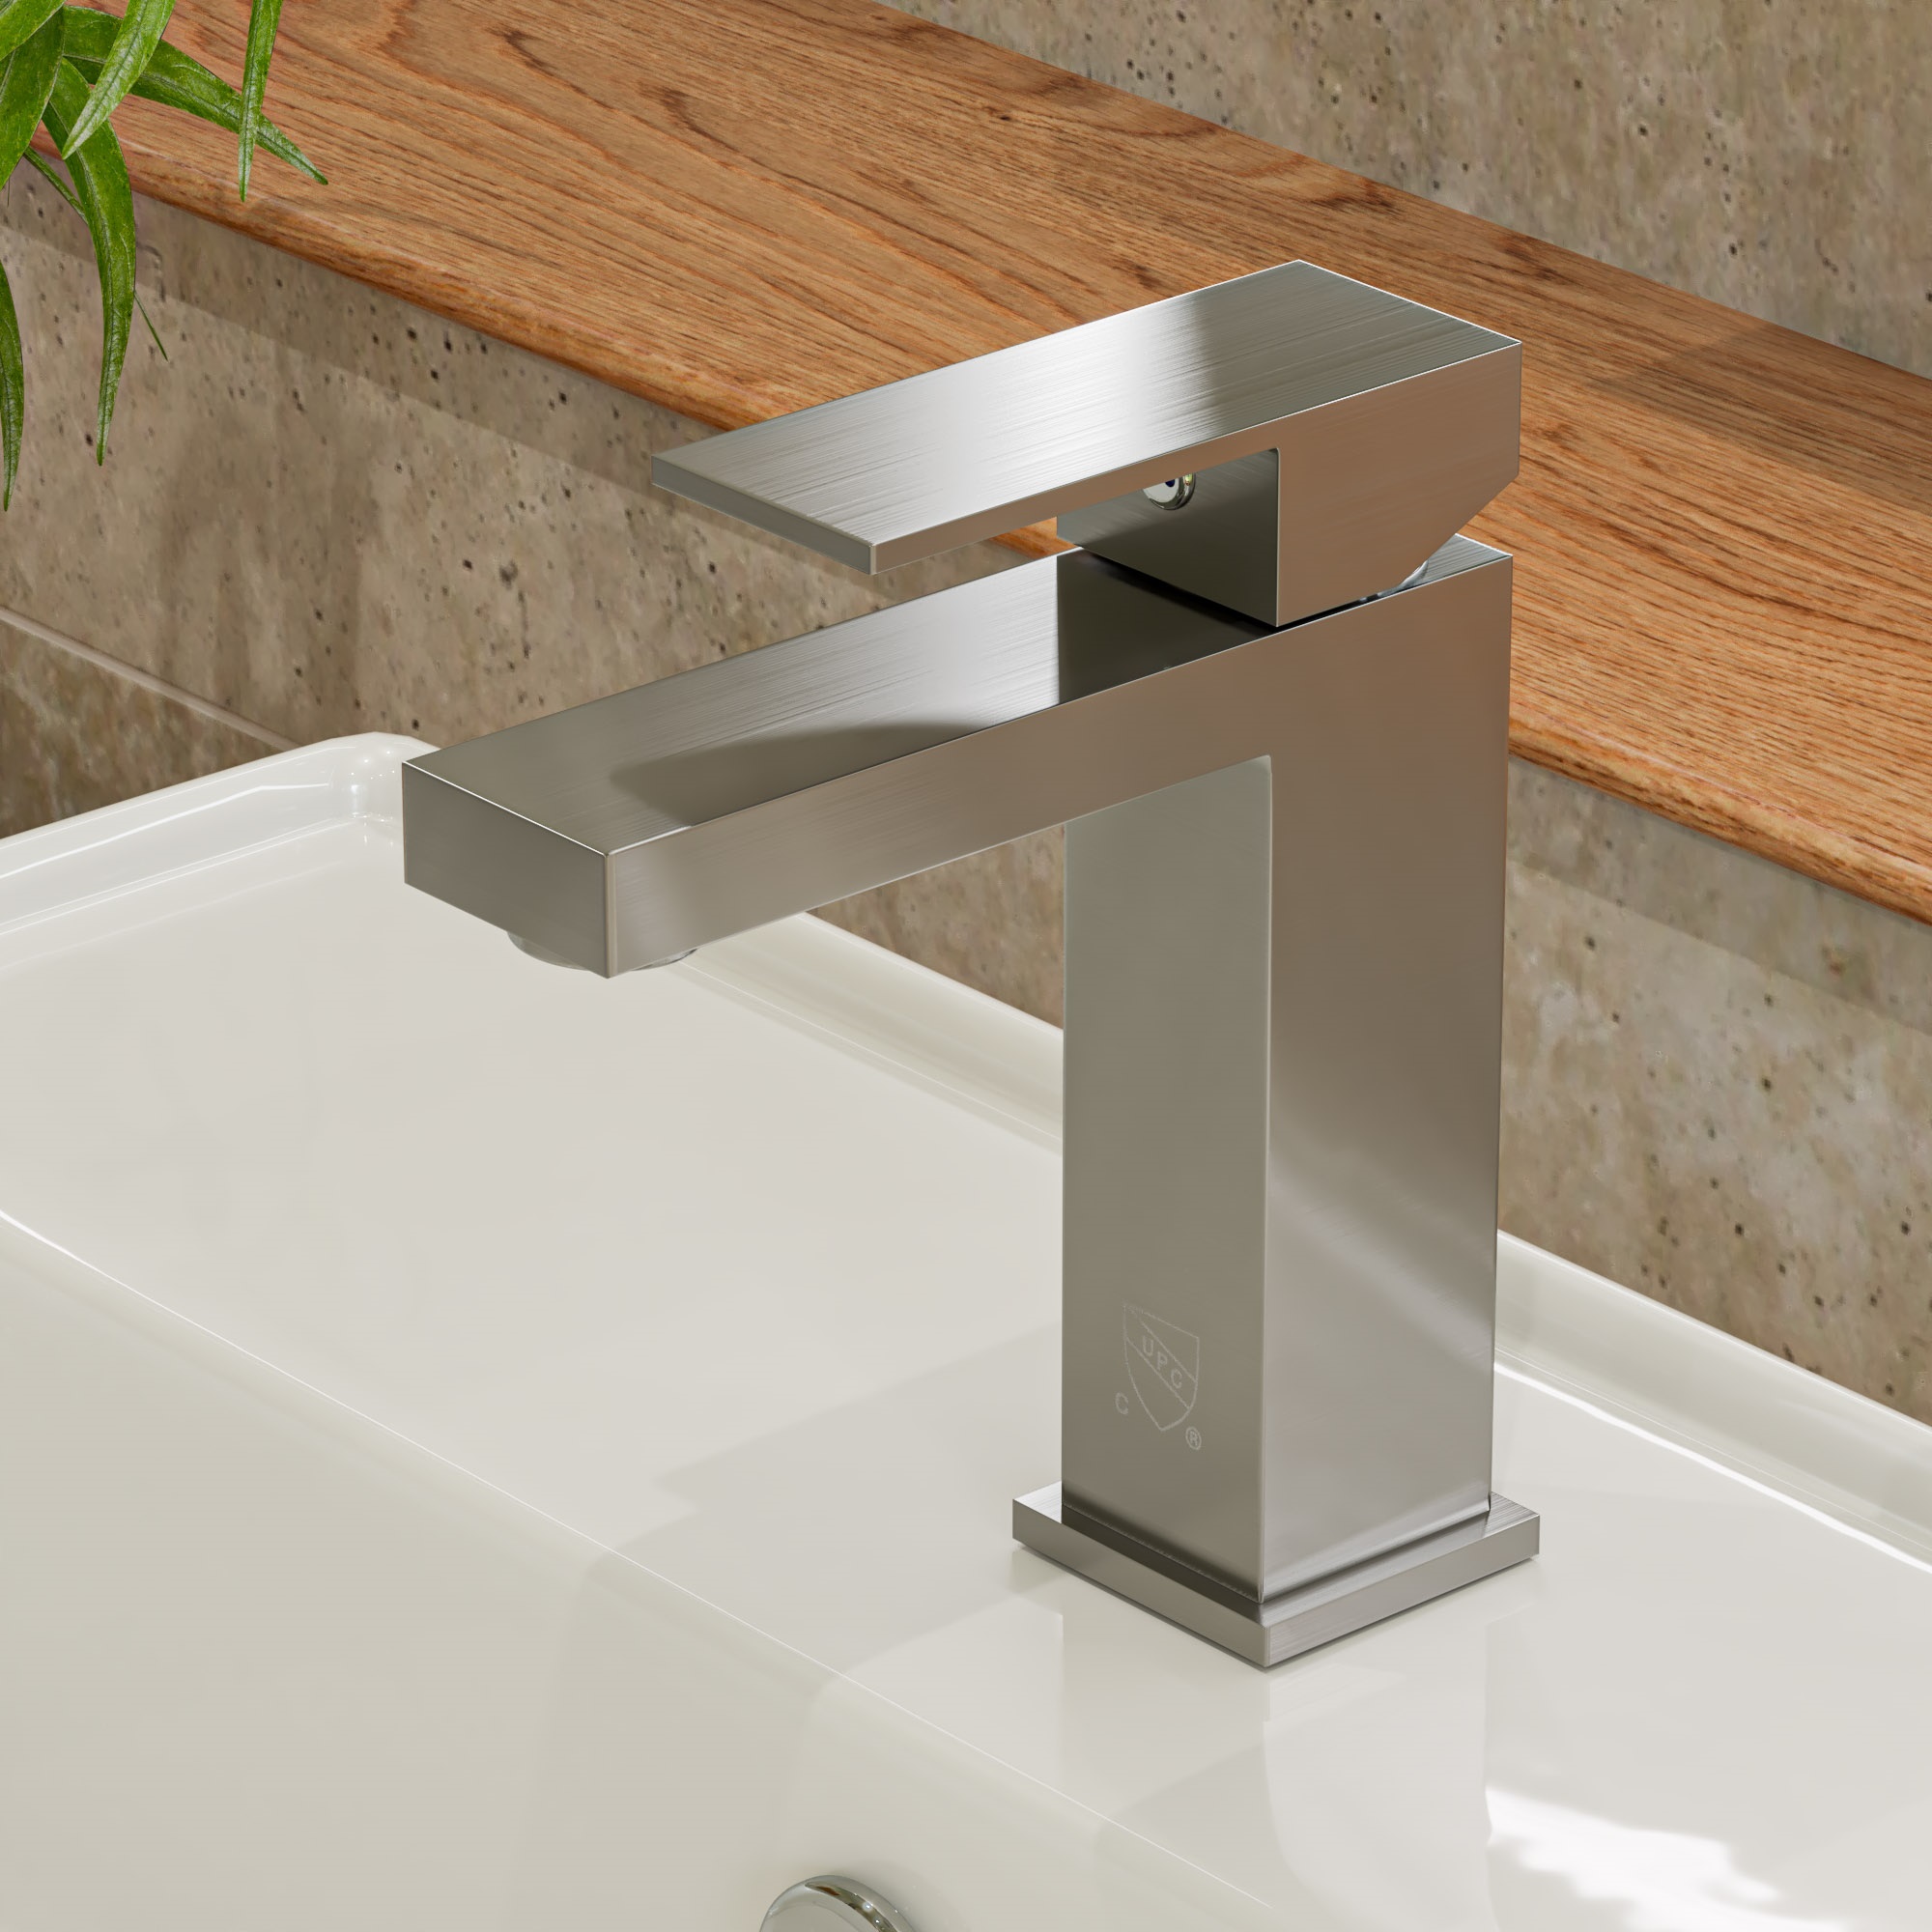 Brushed Nickel Square Single Lever Bathroom Faucet